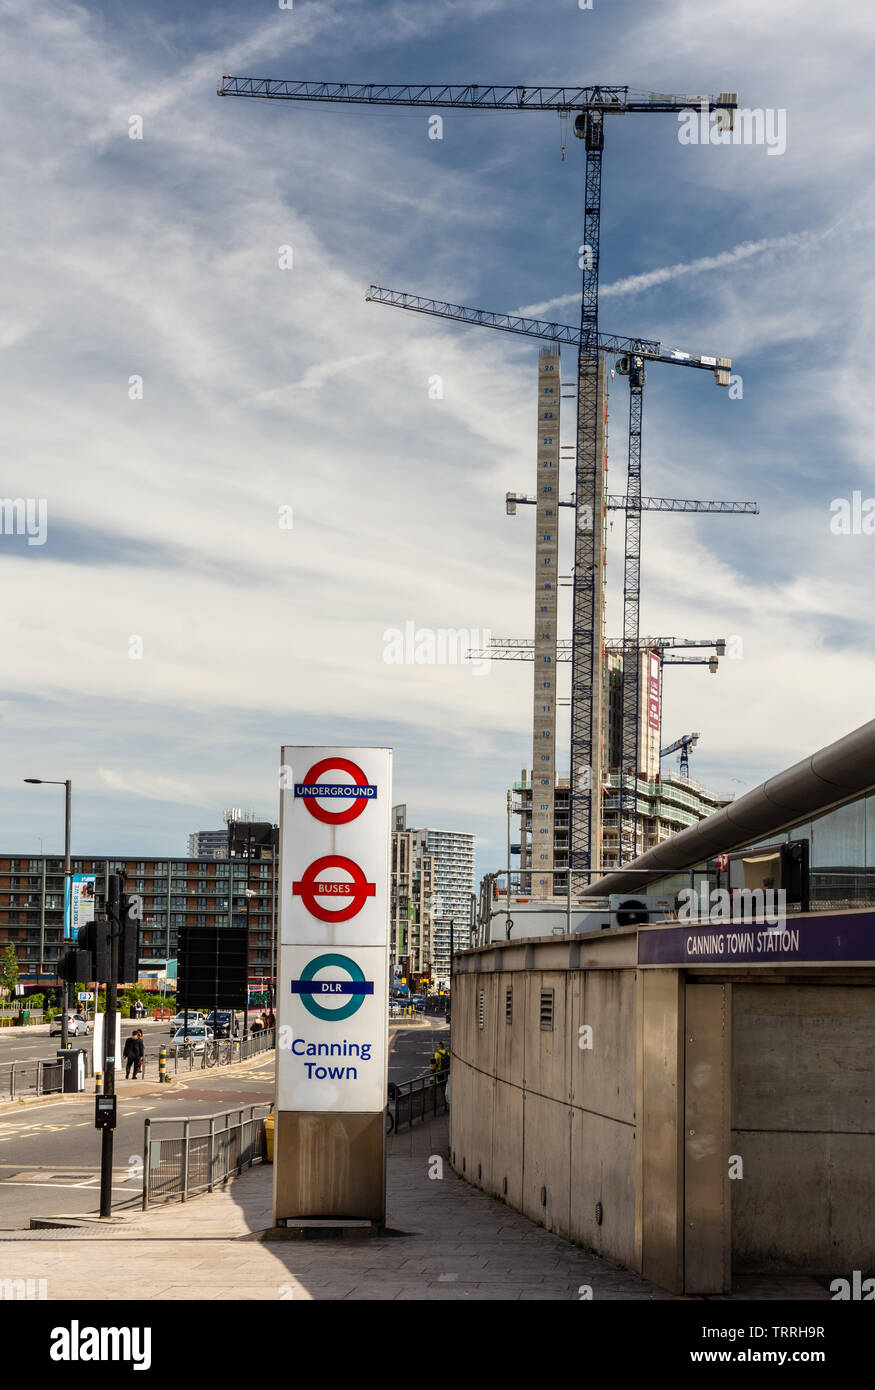 London, England, UK - June 1, 2019: Construction cranes tower over Canning Town London Underground and DLR station during a boom in high rise housing Stock Photo